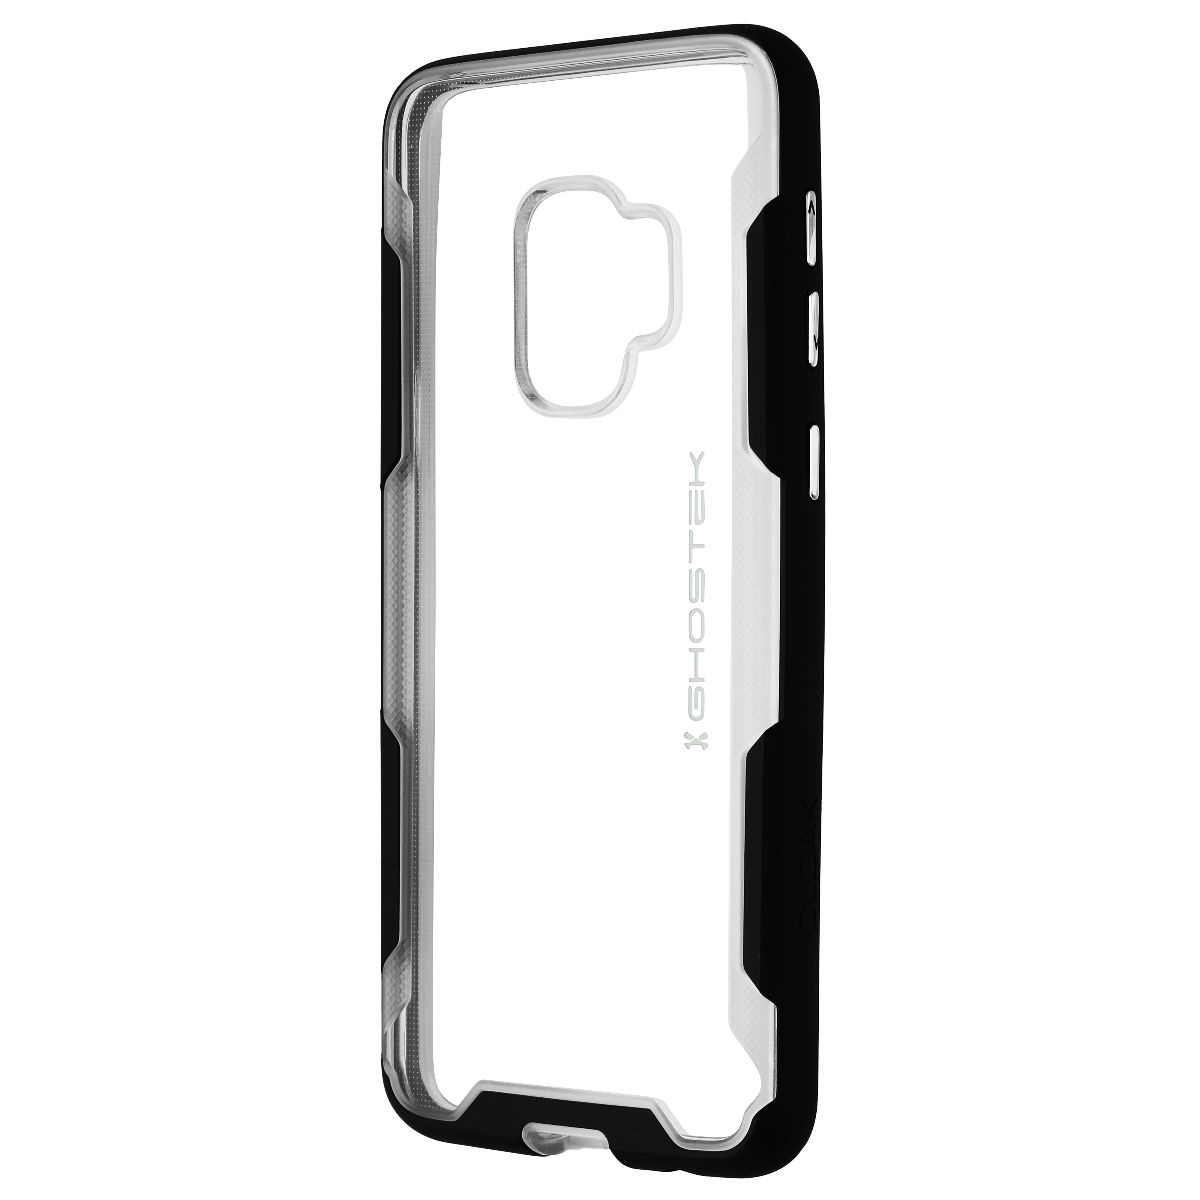 Ghostek Cloak Crystal Clear Protective Case For Galaxy S9 Plus - Black